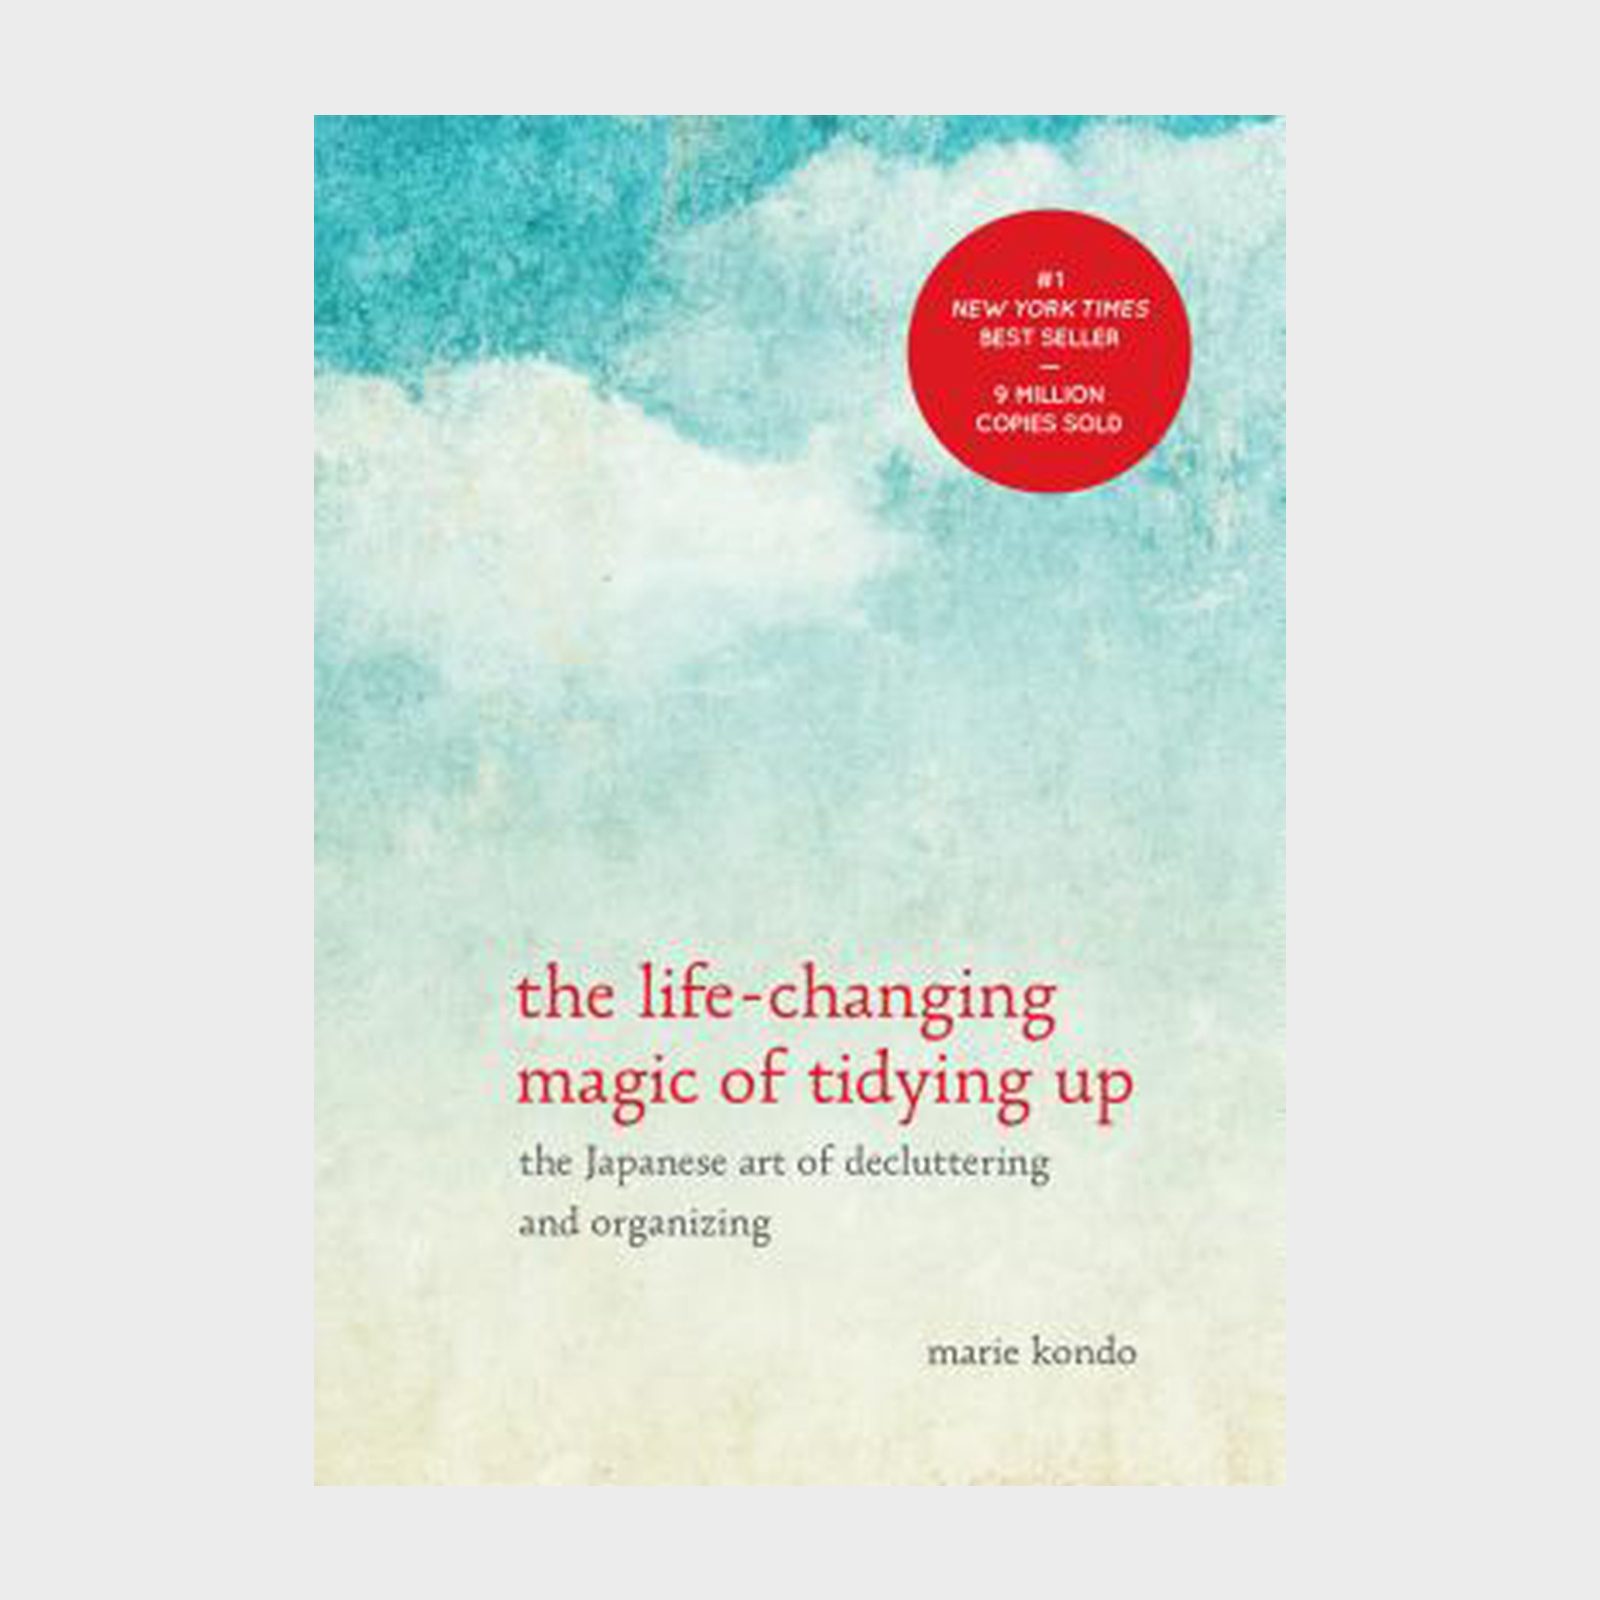 <p>This number one <em>New York Times</em> best-selling book has been sparking joy and a simpler, cleaner lifestyle across the globe since 2010. You may have seen Marie Kondo, with her bright smile and bright outfits, on her two Netflix shows, which help people make fresh starts. These shows followed the movement she started with the KonMari Method of tidying. If mess or clutter has been weighing down your life, the gentle guidance in this book can help you make a change for good. Her approach shows compassion for the person decluttering and gratitude for the items that she helps them let go of. You'll never look at objects the same way after you read this book. For a preview, check out this <a href="https://www.rd.com/article/marie-kondo-folding/">Marie Kondo folding guide</a> to reorganize your drawers and make your life much easier.</p> <p class="listicle-page__cta-button-shop"><a class="shop-btn" href="https://bookshop.org/books/the-life-changing-magic-of-tidying-up-the-japanese-art-of-decluttering-and-organizing-9781607747307/9781607747307">Shop Now</a></p>